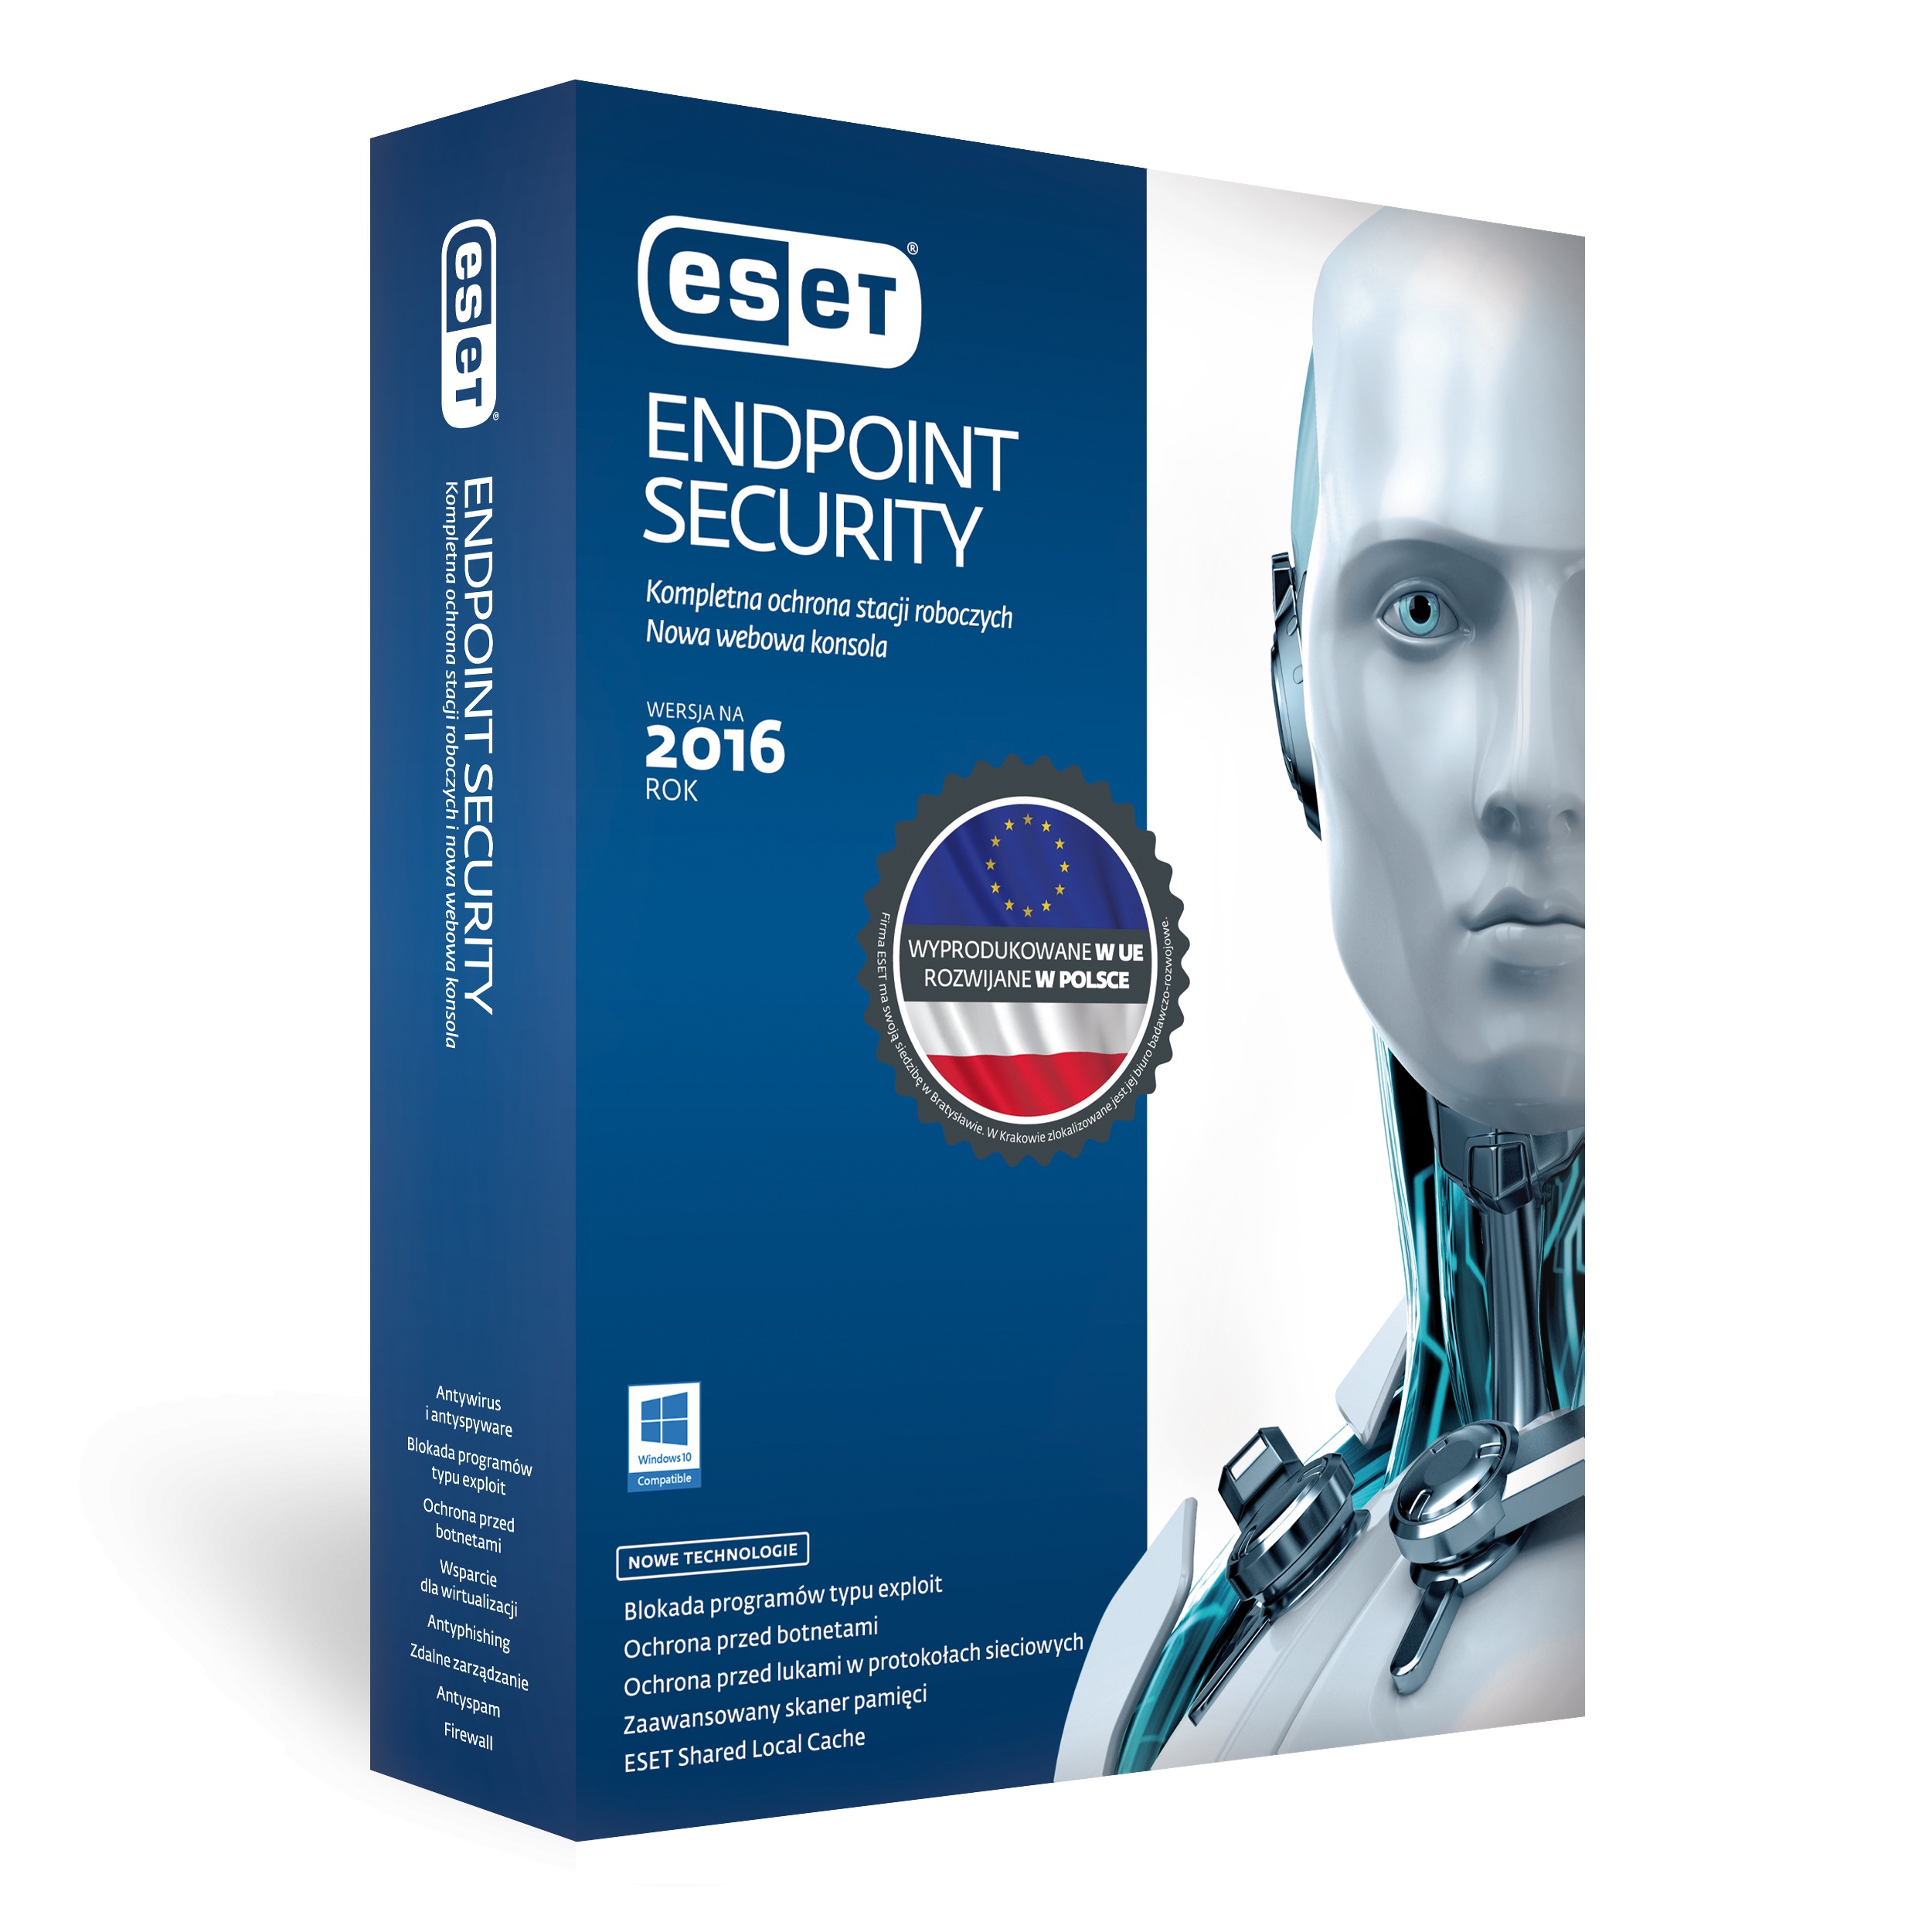 ESET Endpoint Security 10.1.2058.0 download the new for ios